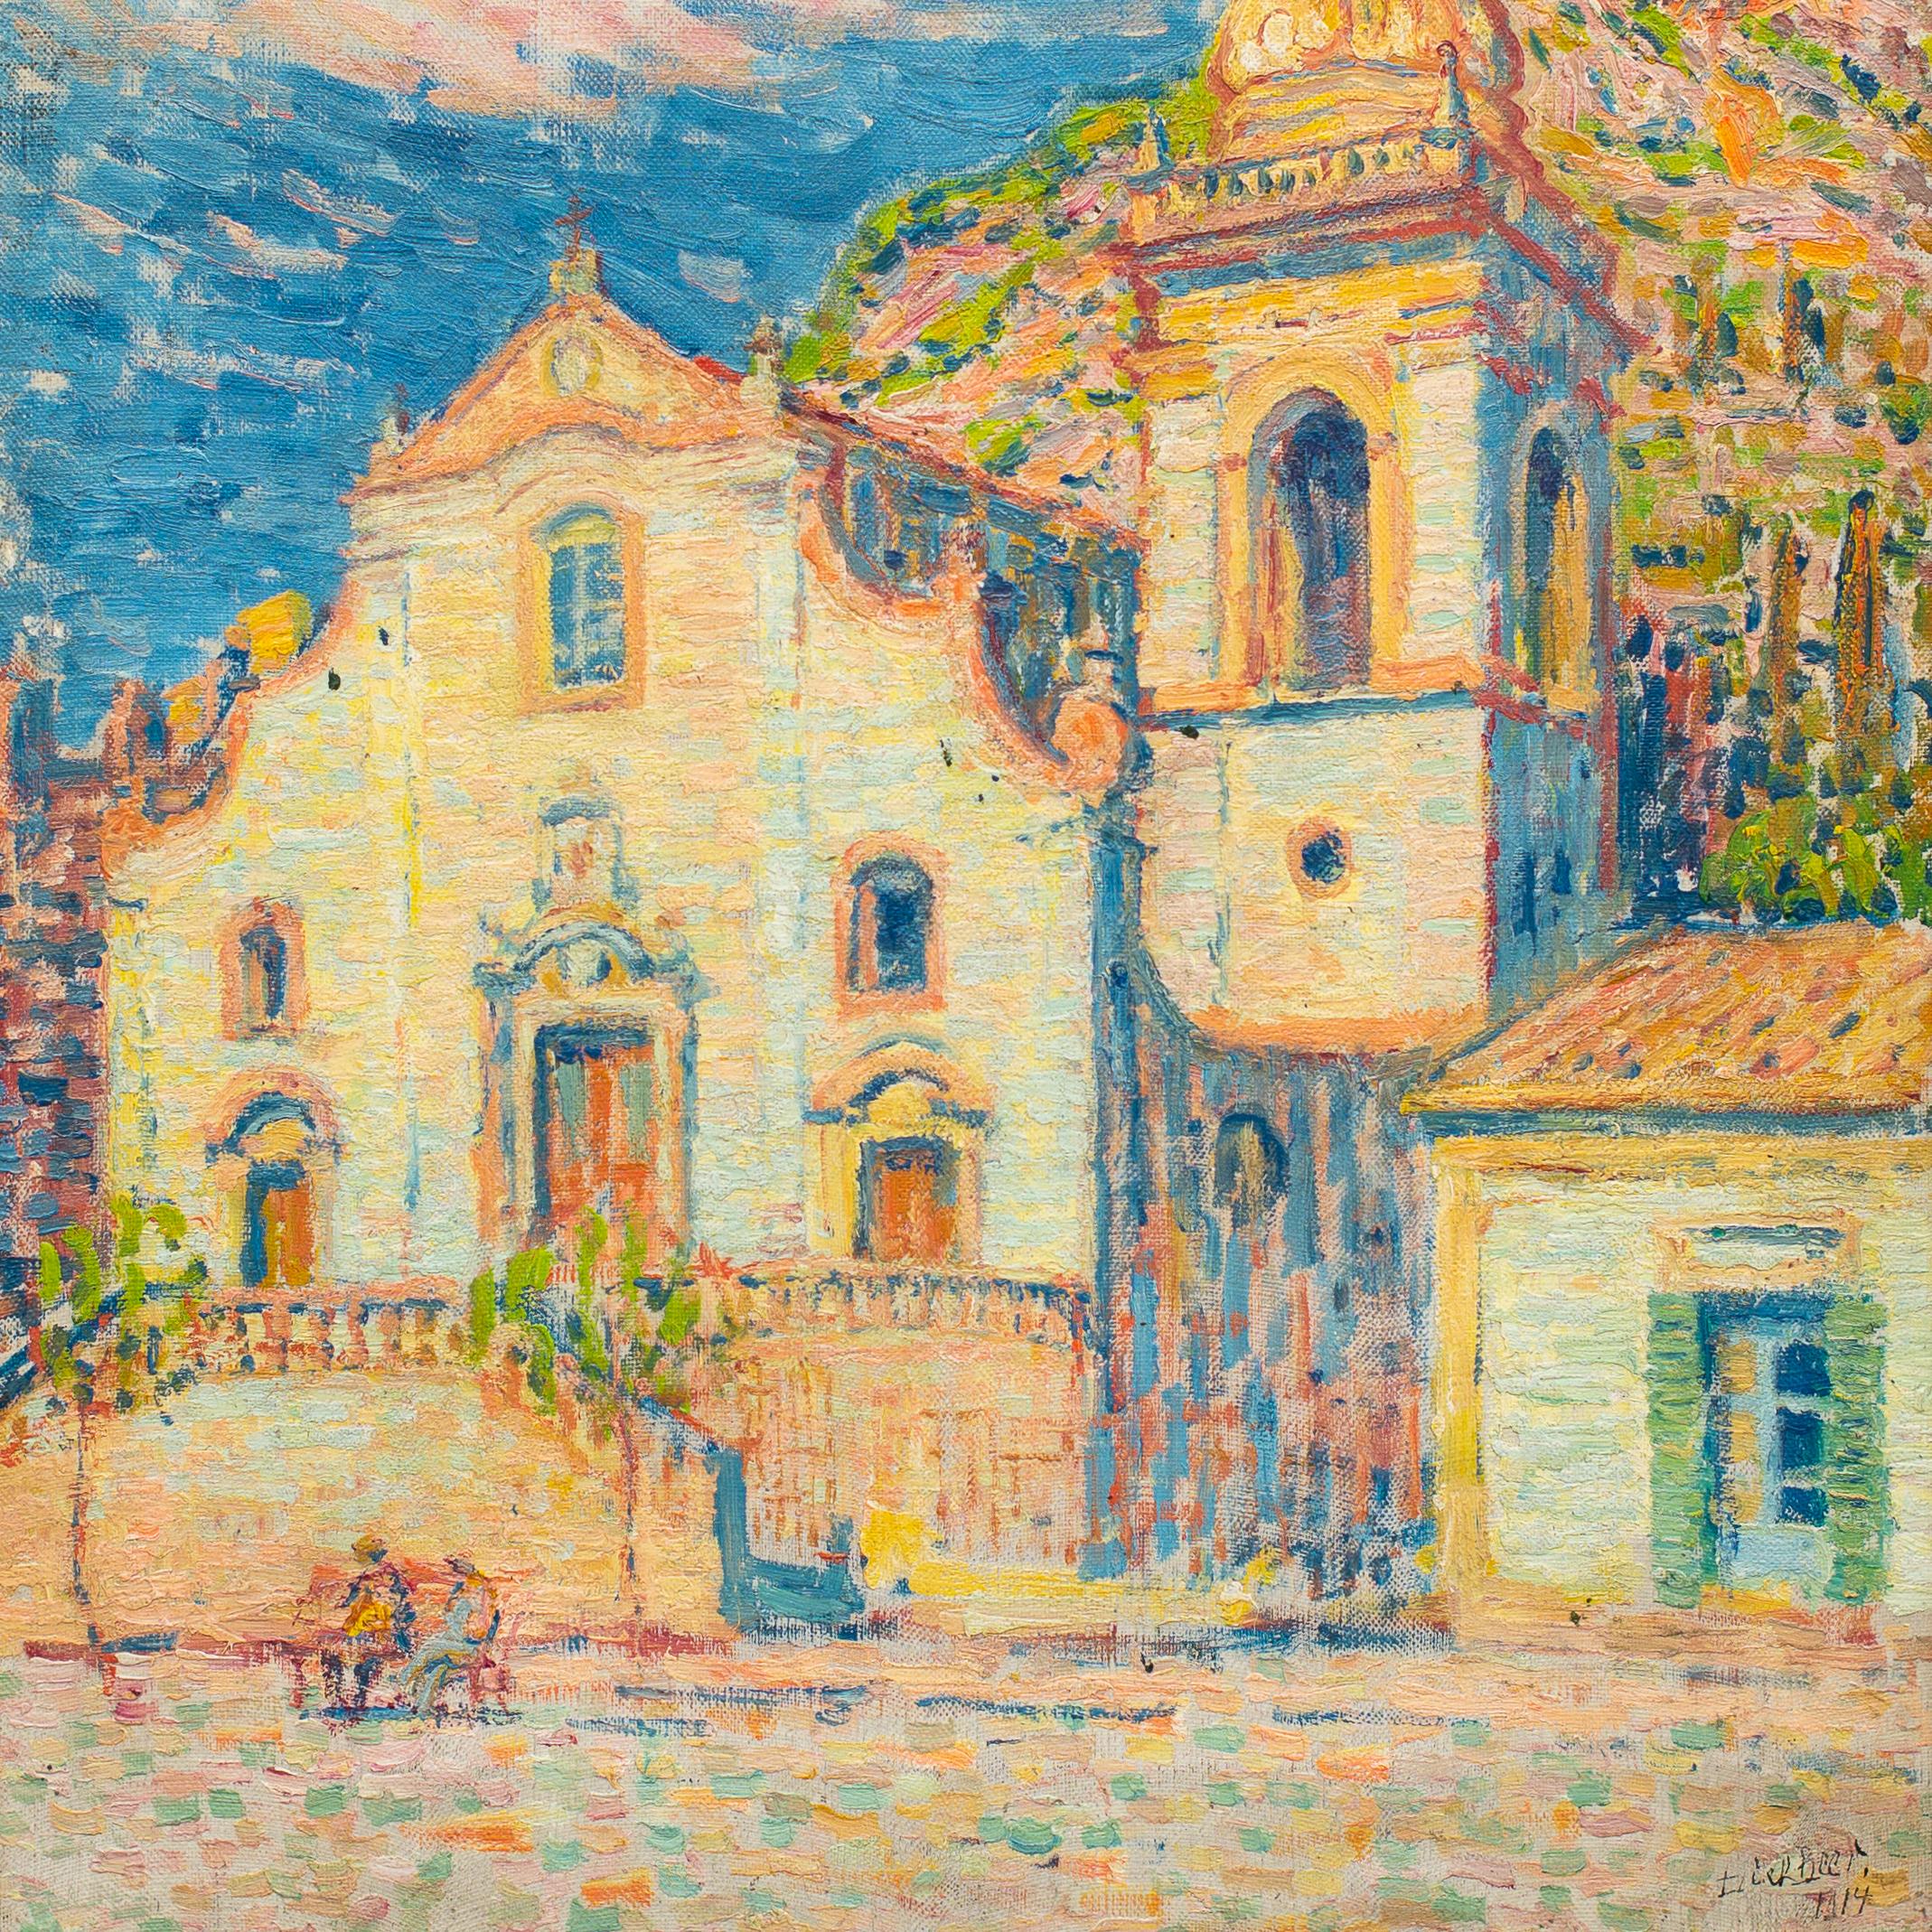 Dick Beer (b. London 1893 - d. Stockholm 1938) 

The Church in Taormina, Sicily (Kyrkan i Taormina)

oil on canvas
canvas dimensions 54 x 47 cm
signed and dated Dick Beer 1914
painted 1914

Exhibited:
Varias Konstsalong, Stockholm,